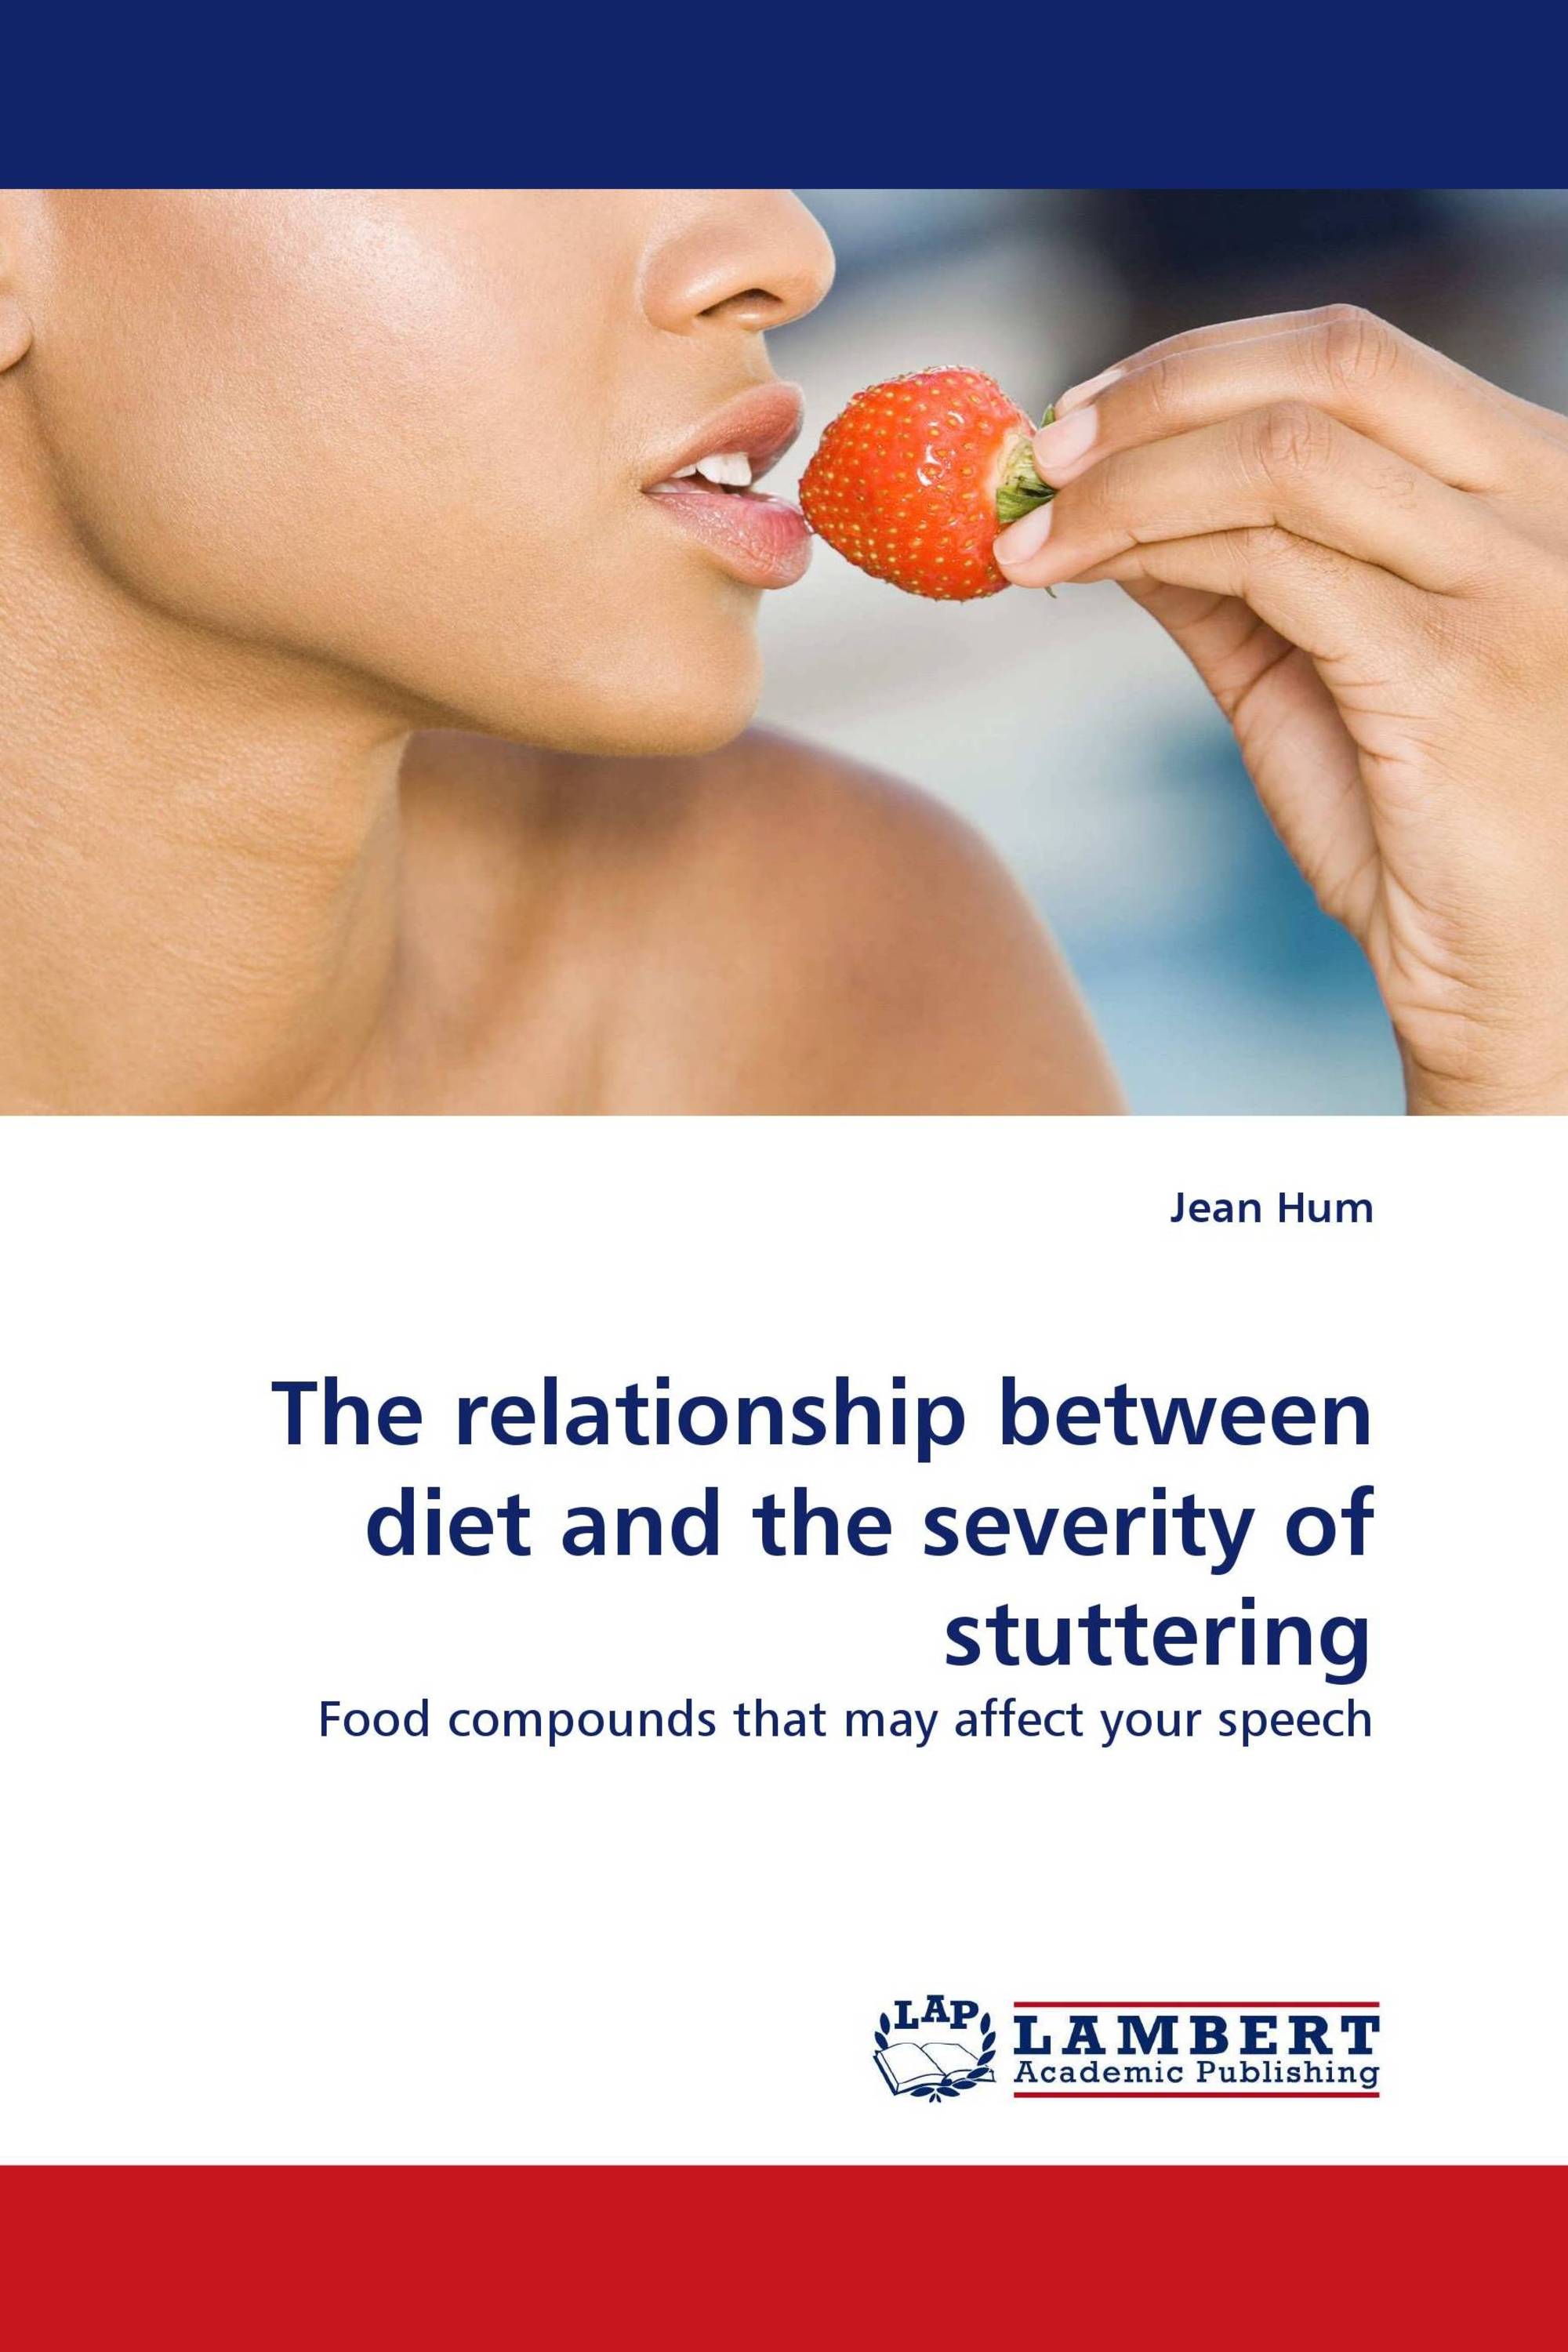 The relationship between diet and the severity of stuttering